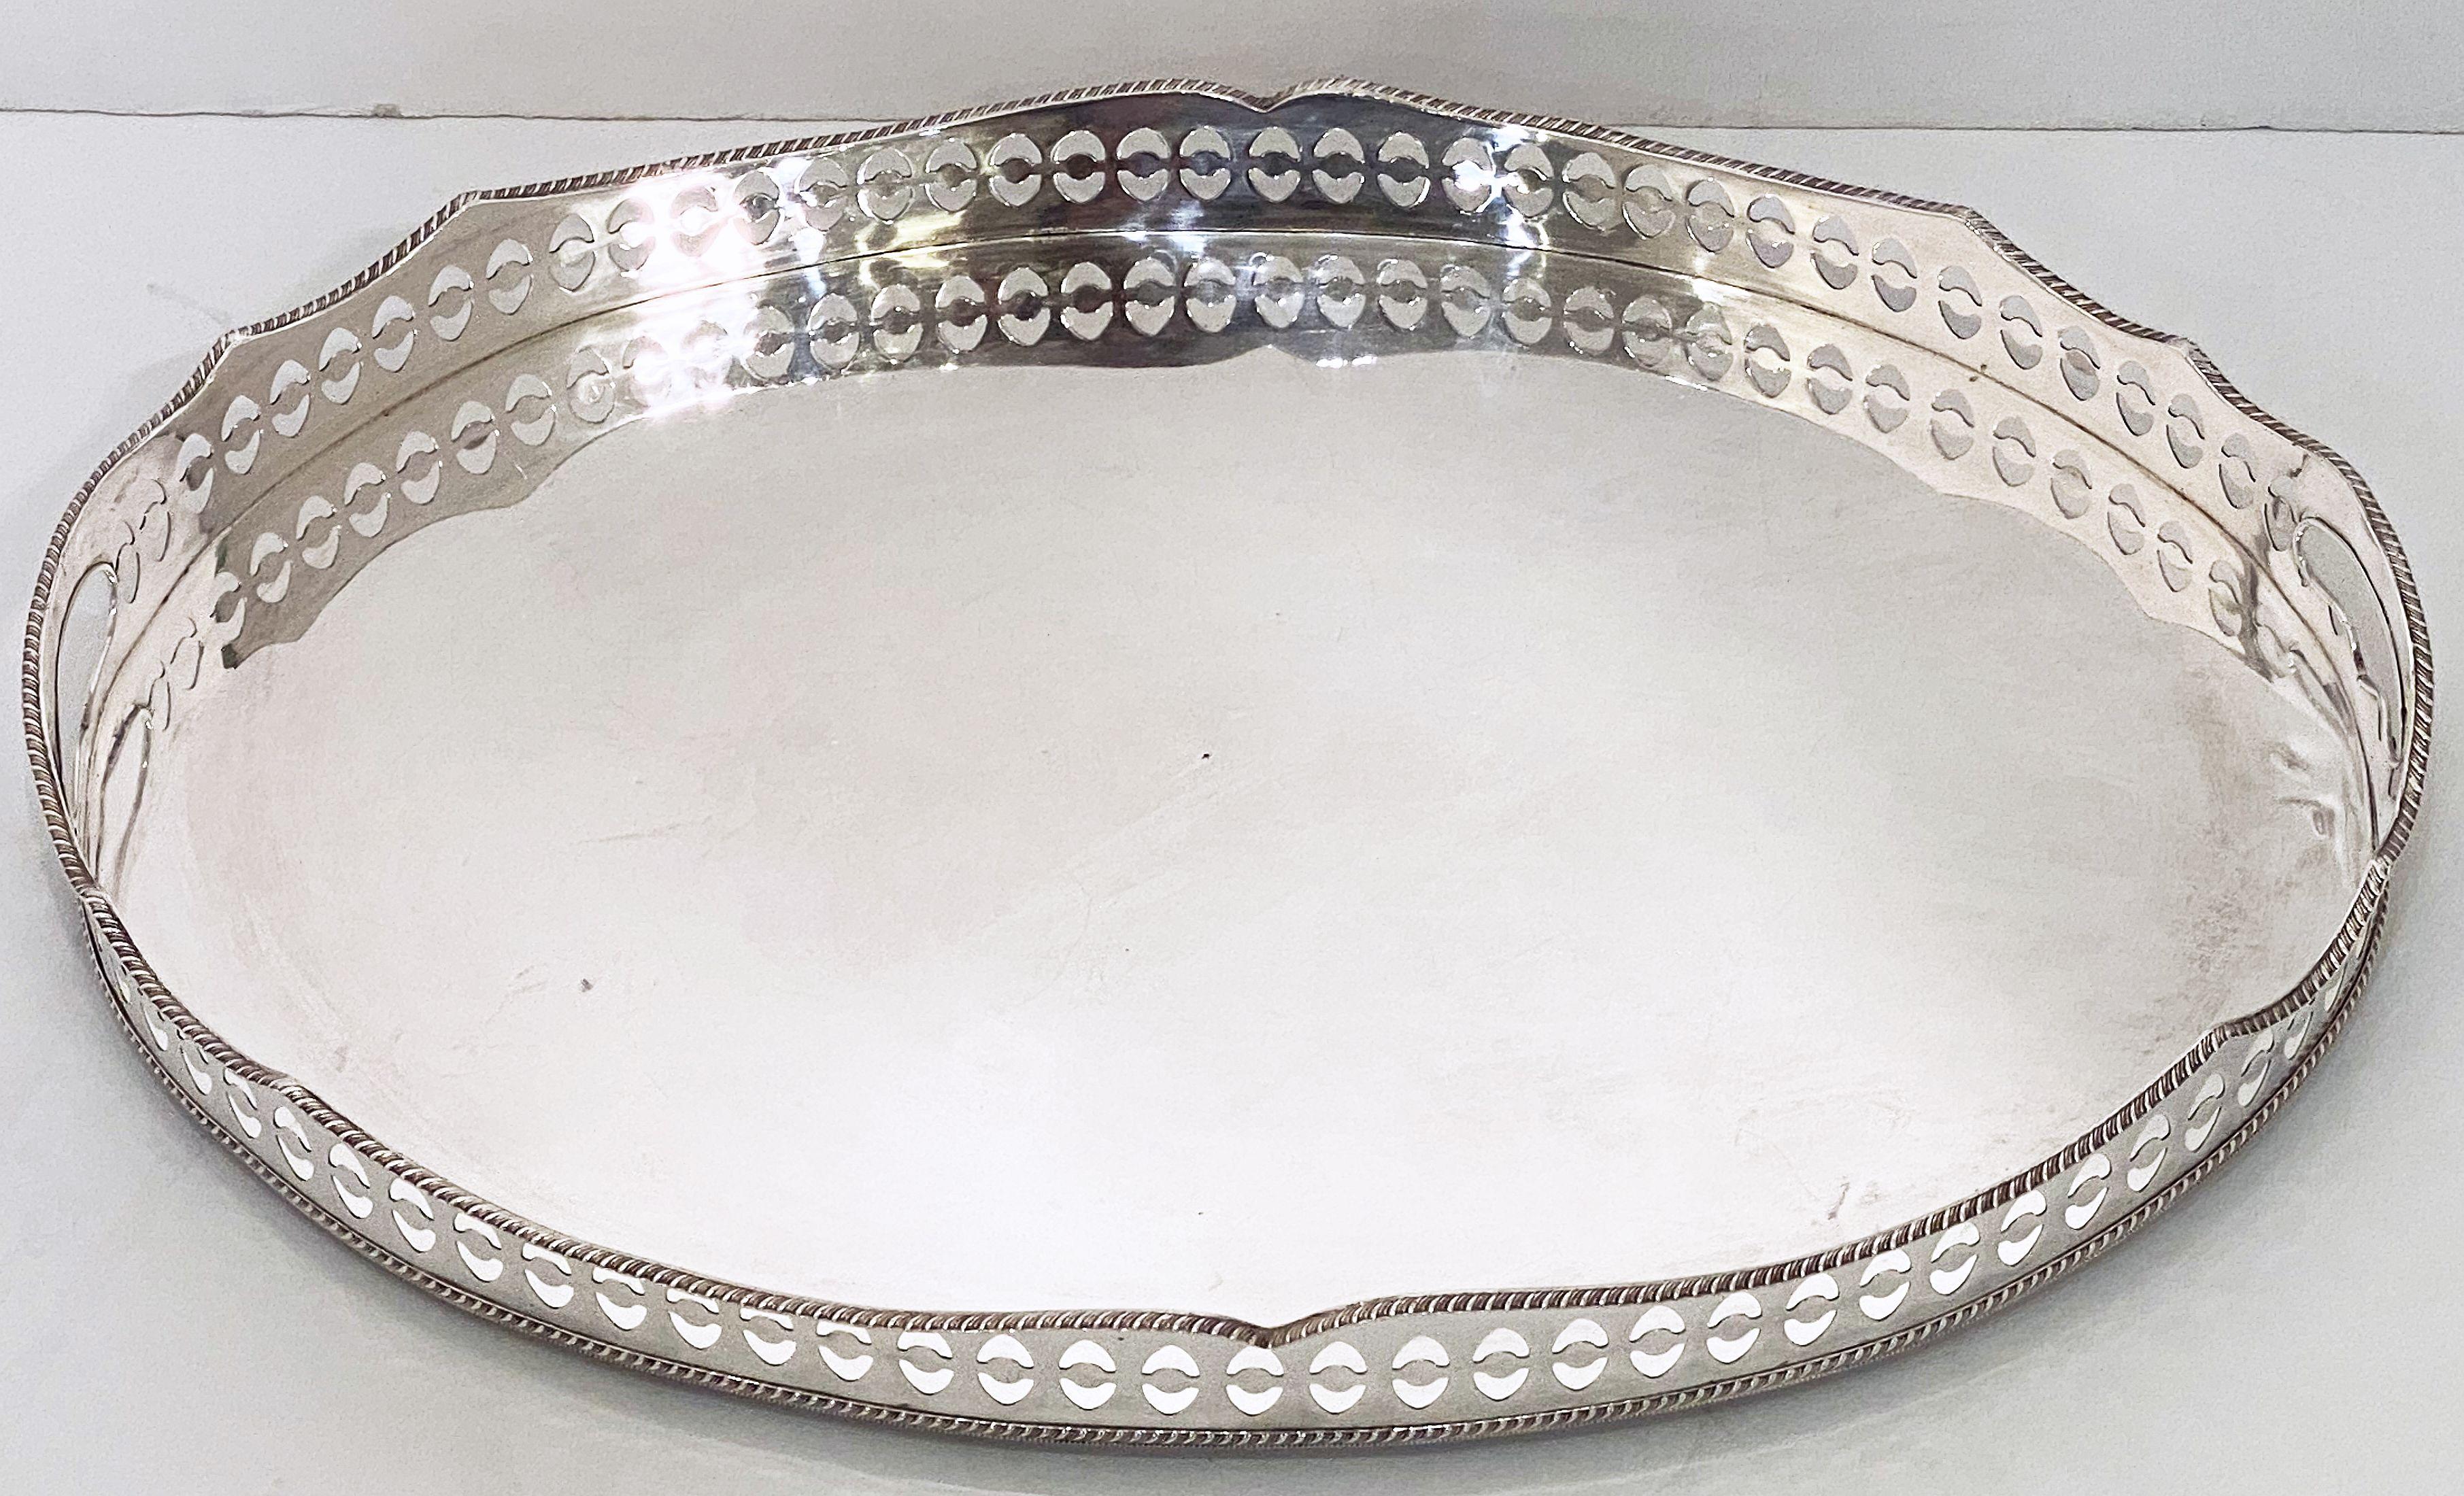 A handsome large English oval gallery serving or drinks tray (or platter) of fine plate silver - featuring a pierced serpentine gallery with a distinctive design around the circumference.

Dimensions: Gallery H 2 1/4 inches x W 20 1/2 inches x D